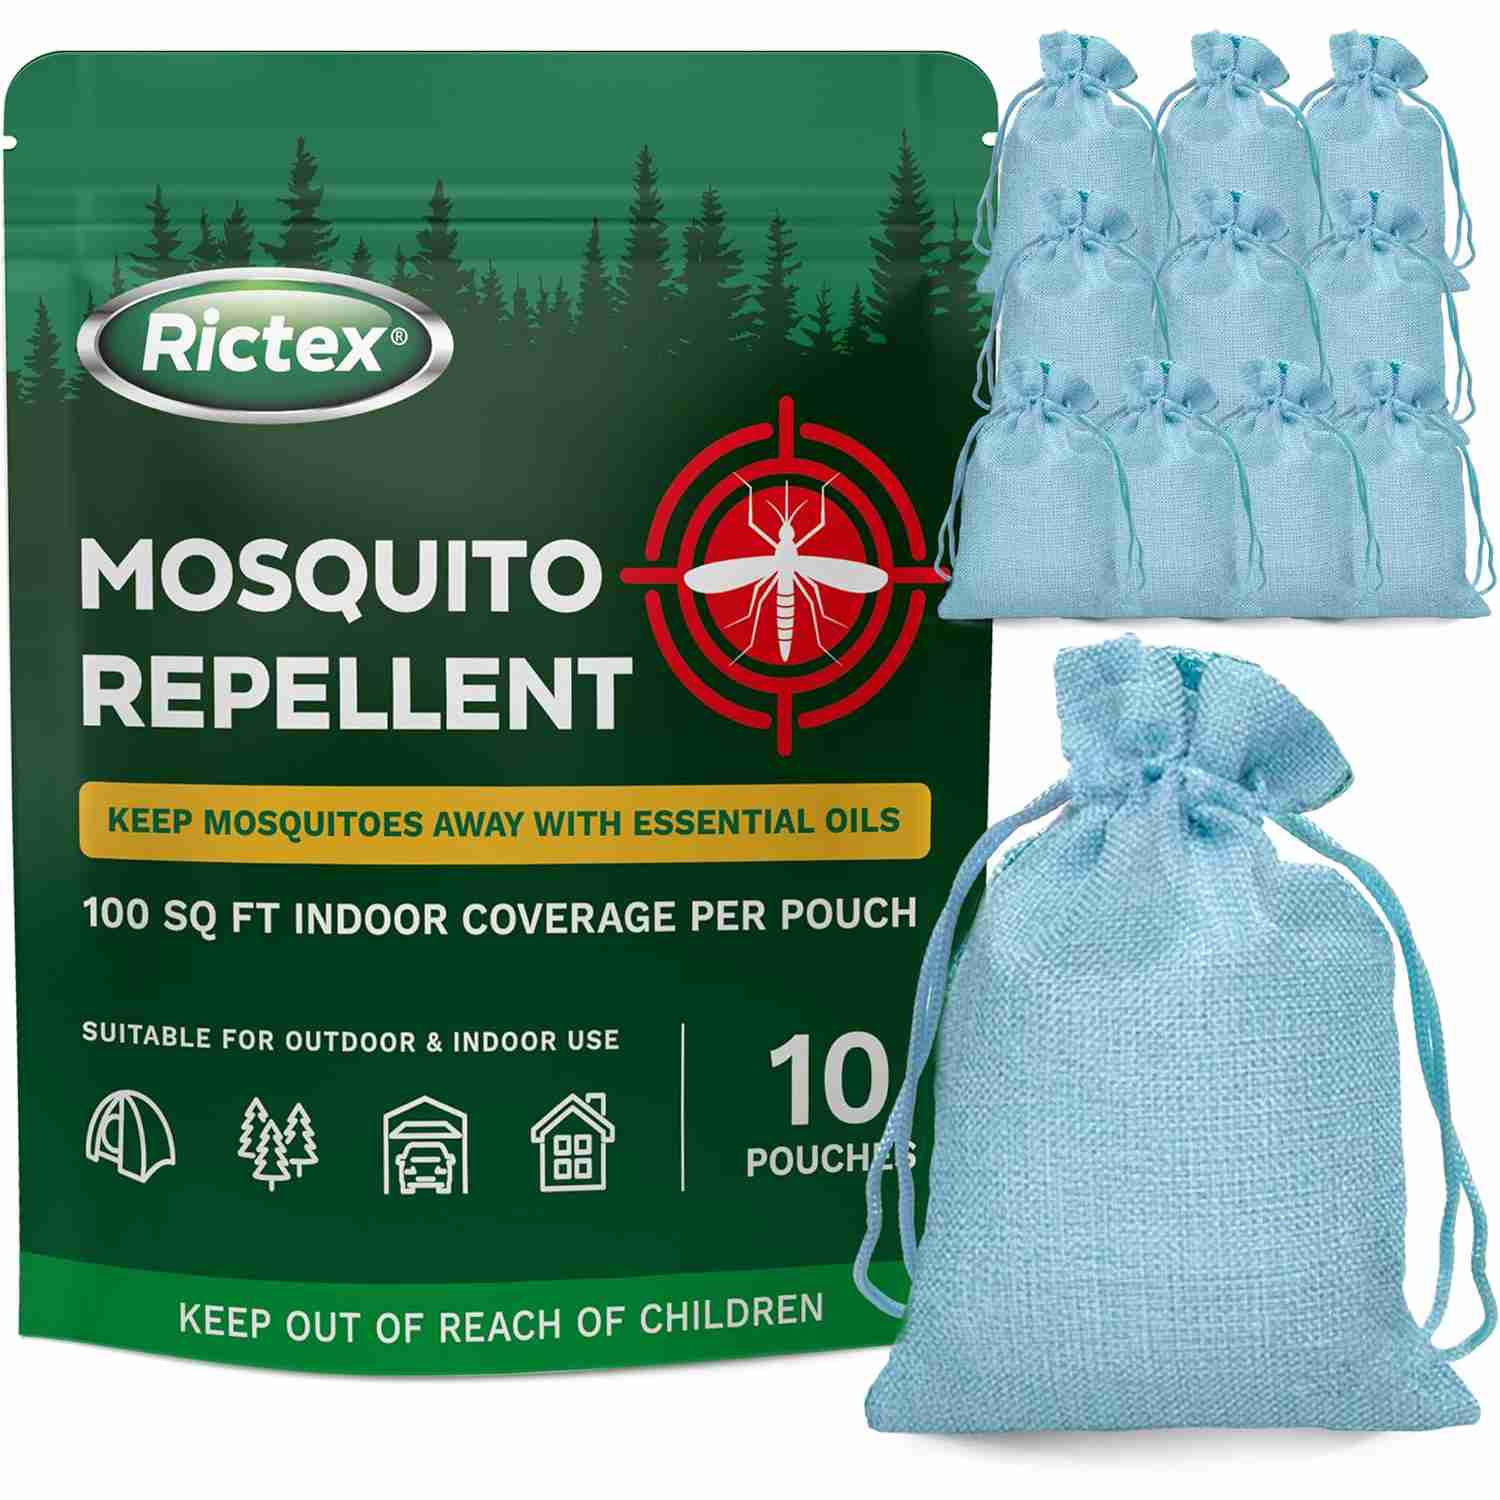 mosquito-repellent-outdoor-patio with cash back rebate